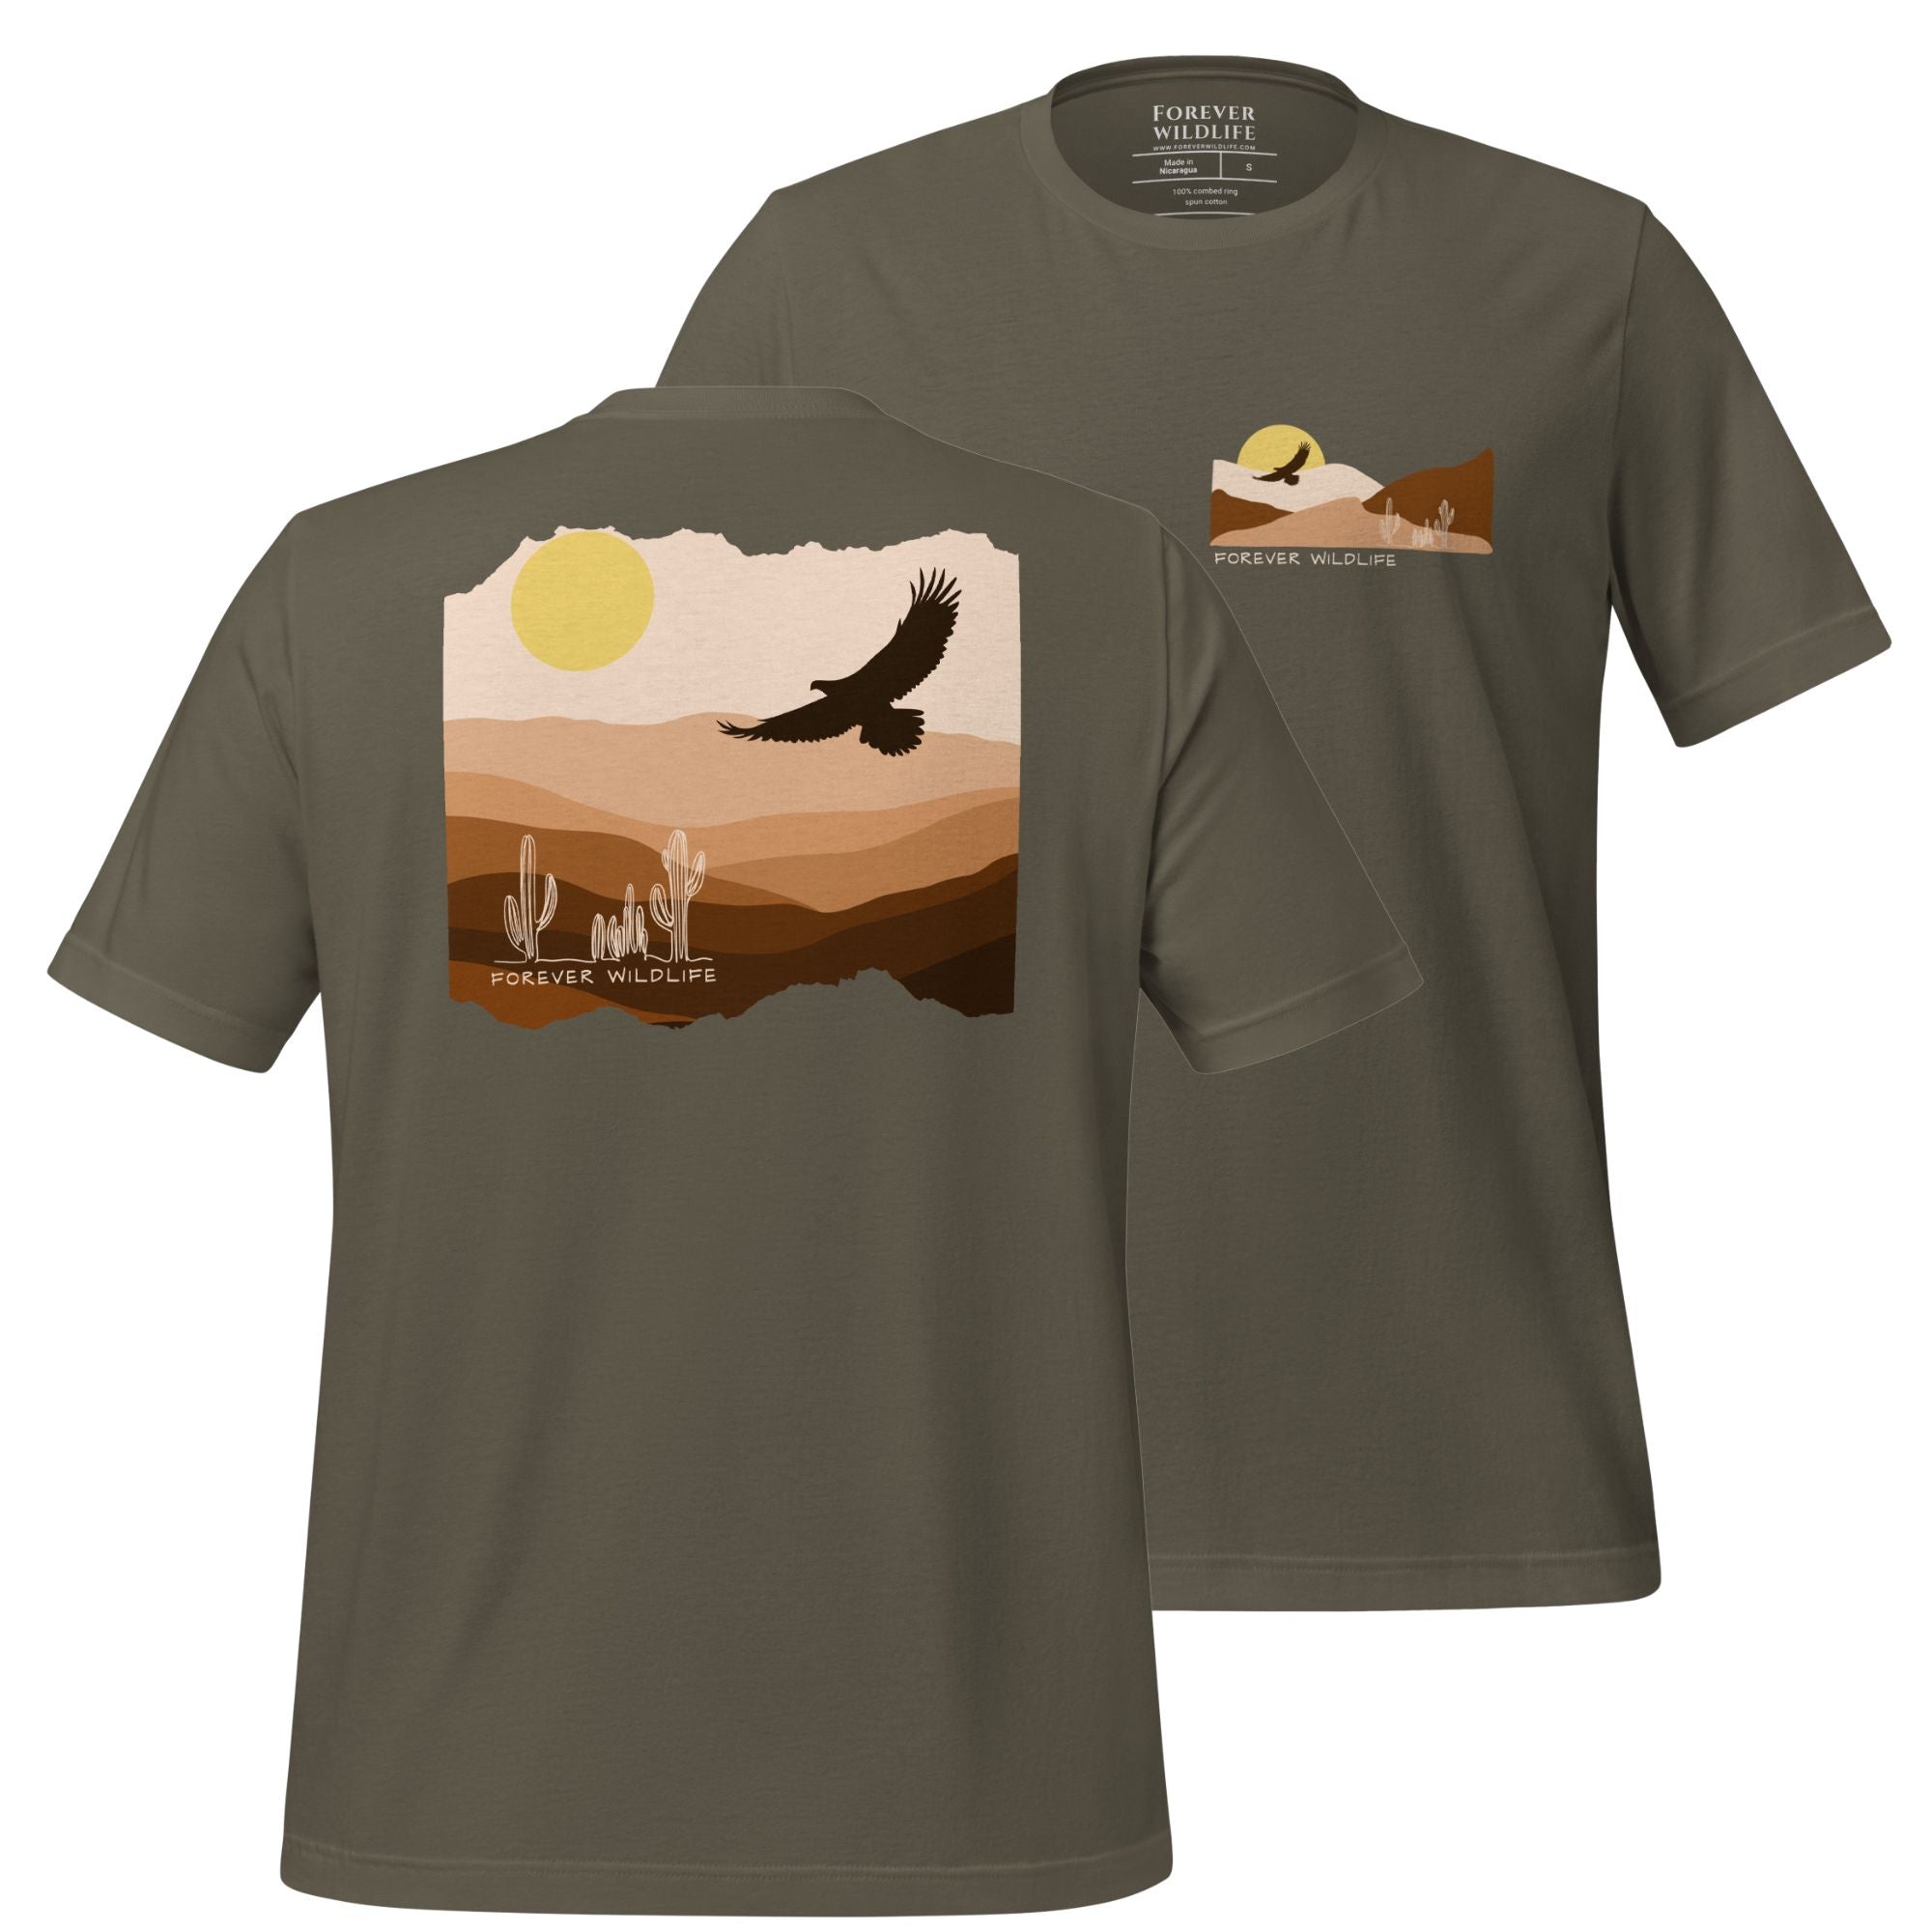 Eagle T-shirt, beautiful army Eagle t-shirt with eagle soaring over the desert part of Wildlife t-shirts collection.